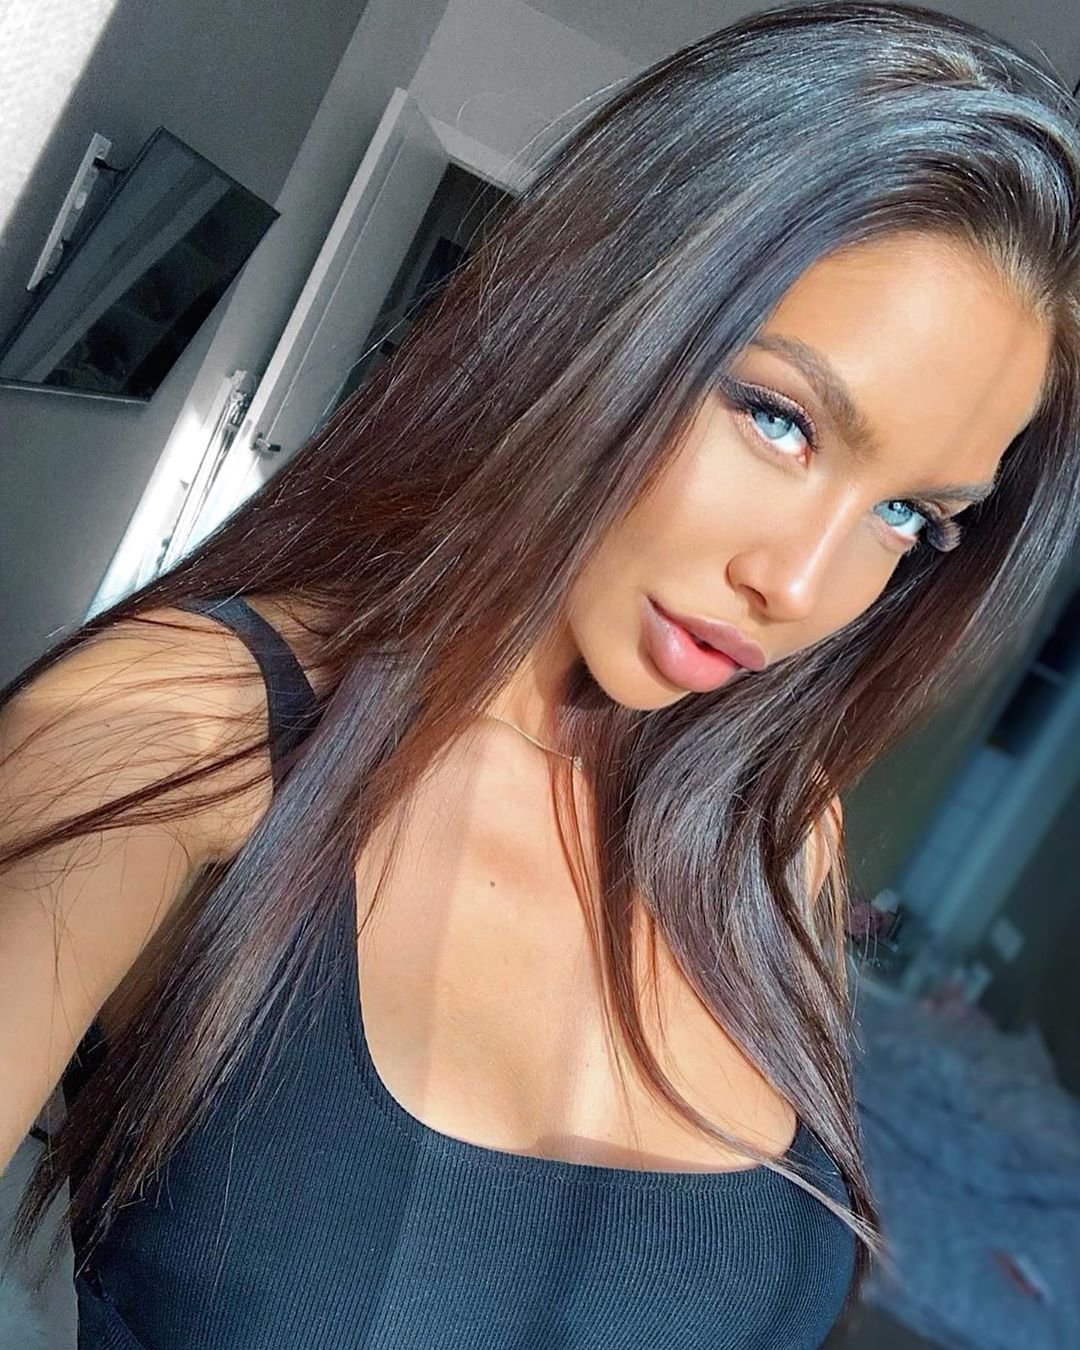 Photo by Devynsdogg with the username @Devynsdogg,  May 30, 2019 at 3:55 AM. The post is about the topic Beautiful Girls and the text says 'I love that combination of blue eyes and brunette hair! Especially she’s as hot as this! #BeautifulBrunettes #SexyFemales #Babes #LittleBlackDress
https://www.instagram.com/p/ByDx4sxoOxo/?utm_source=ig_web_copy_link'